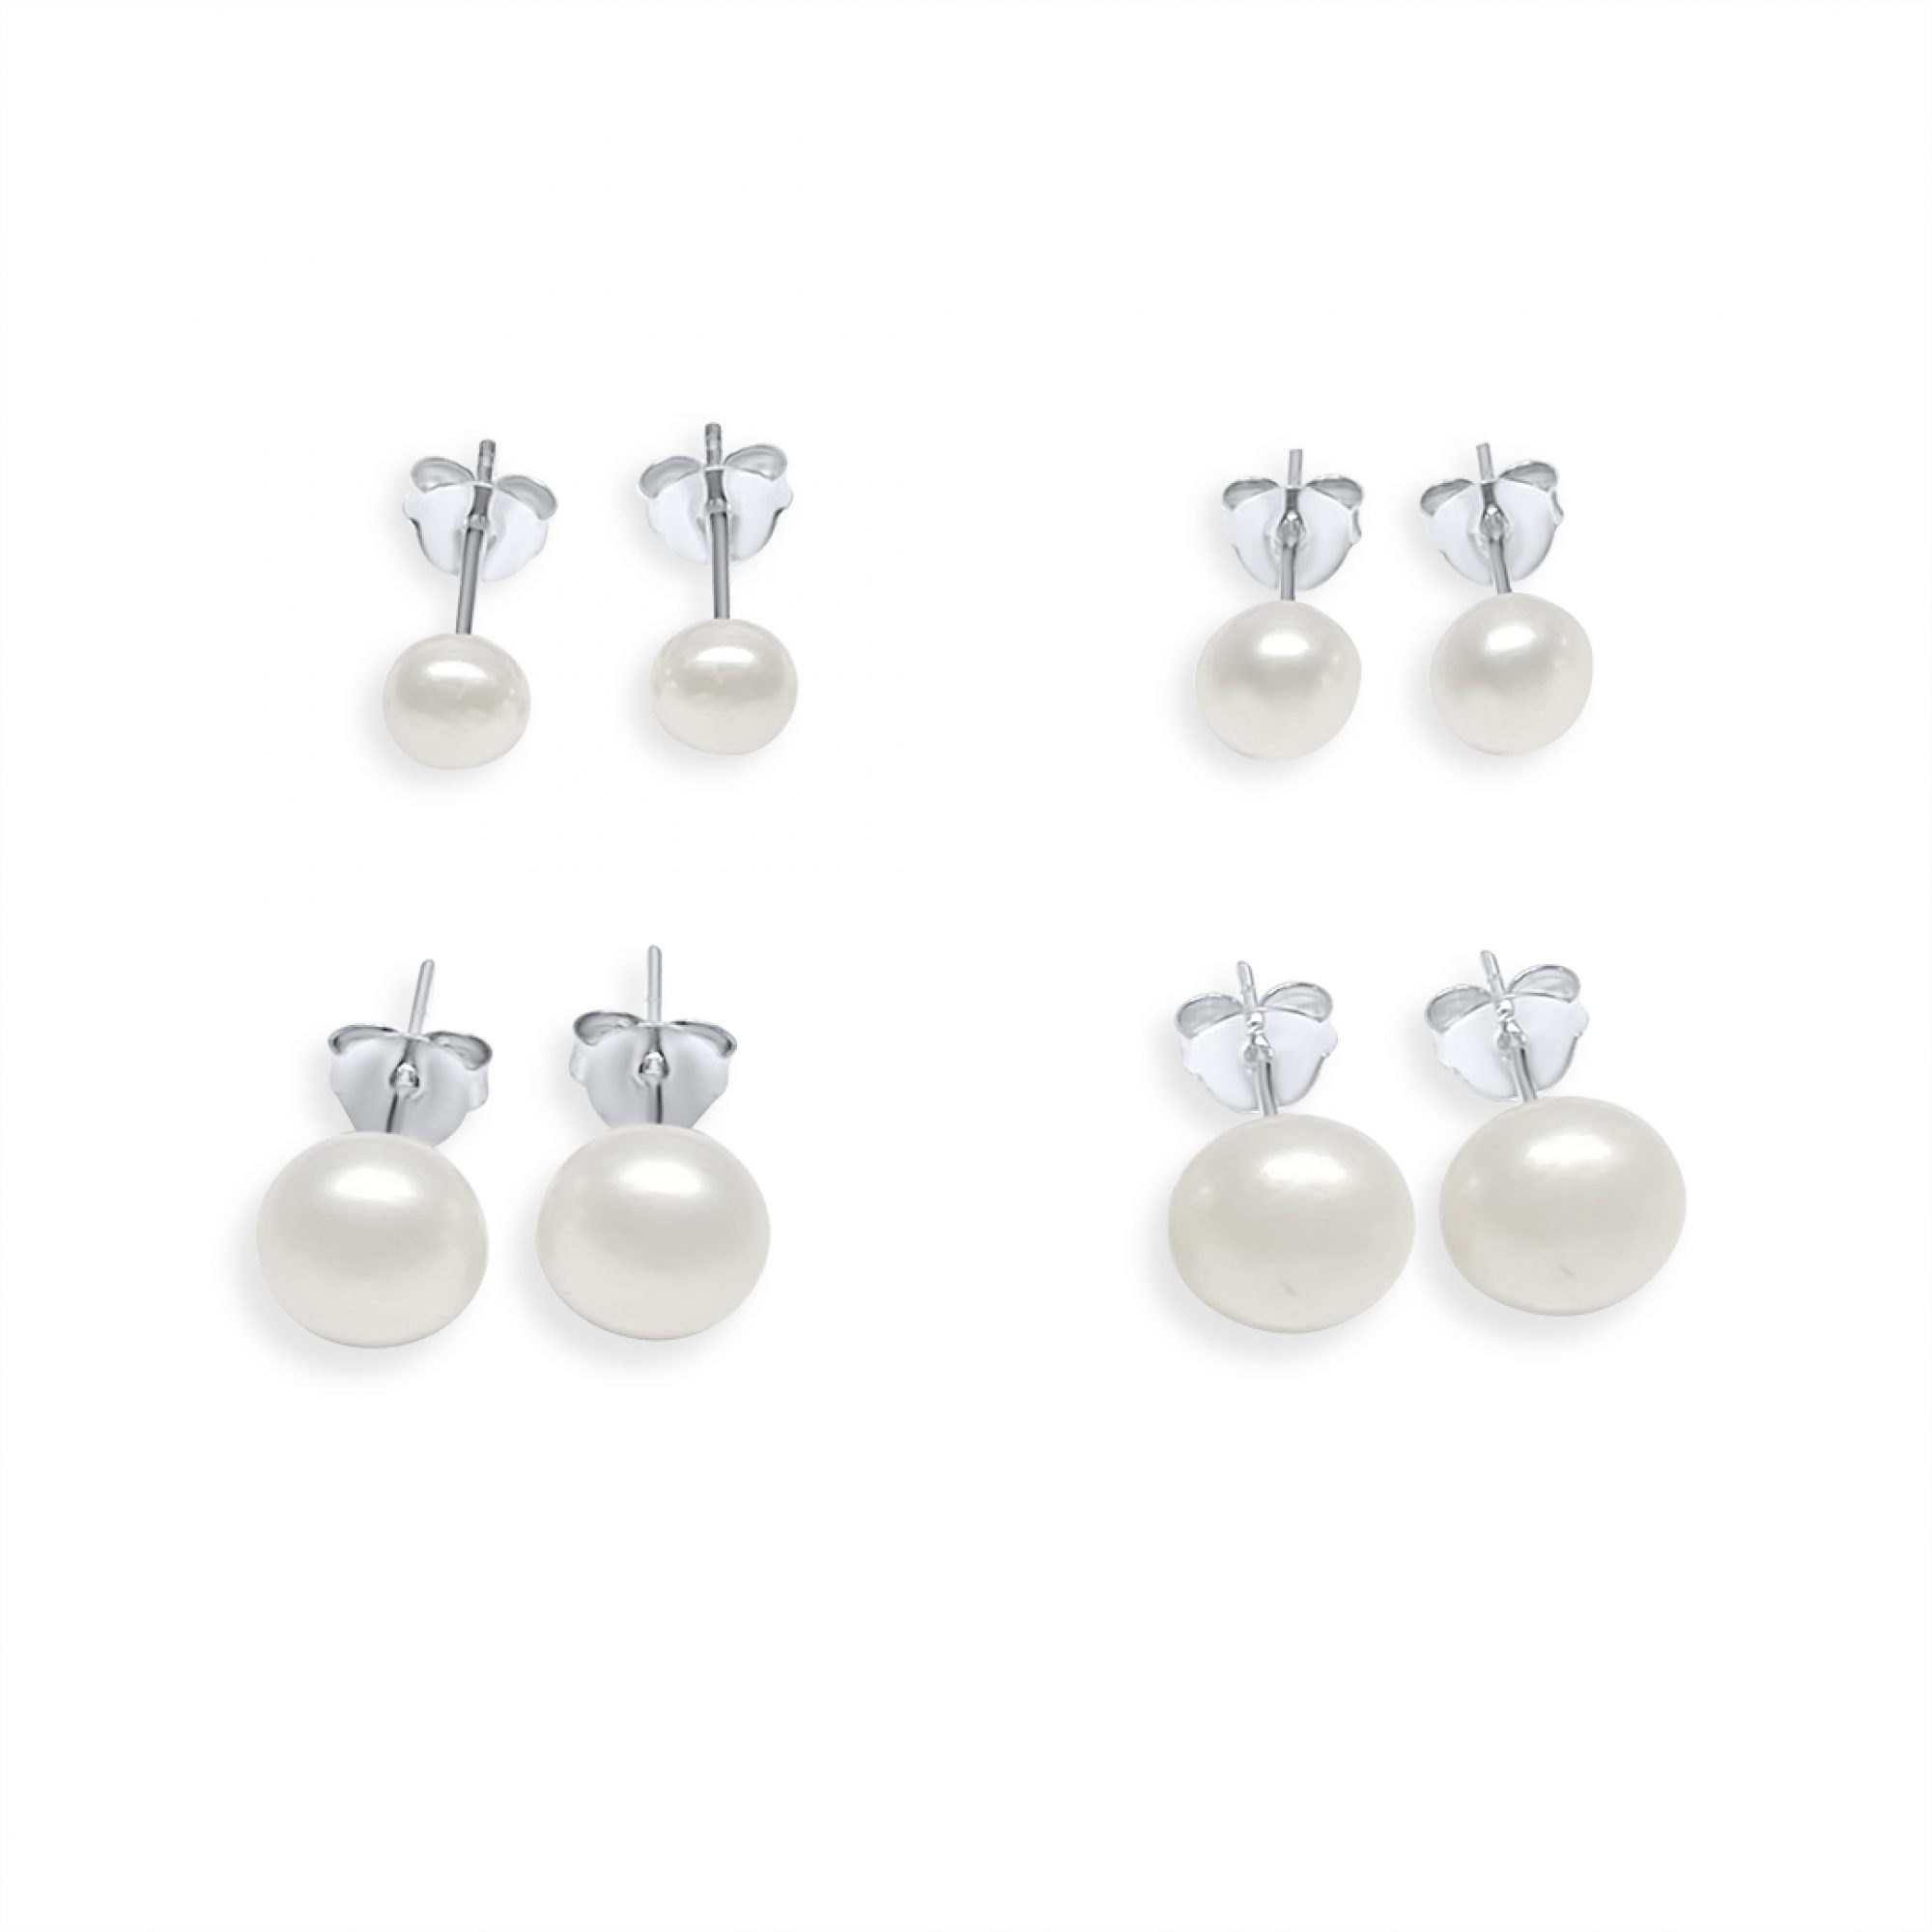 Silver stud earrings with pearls